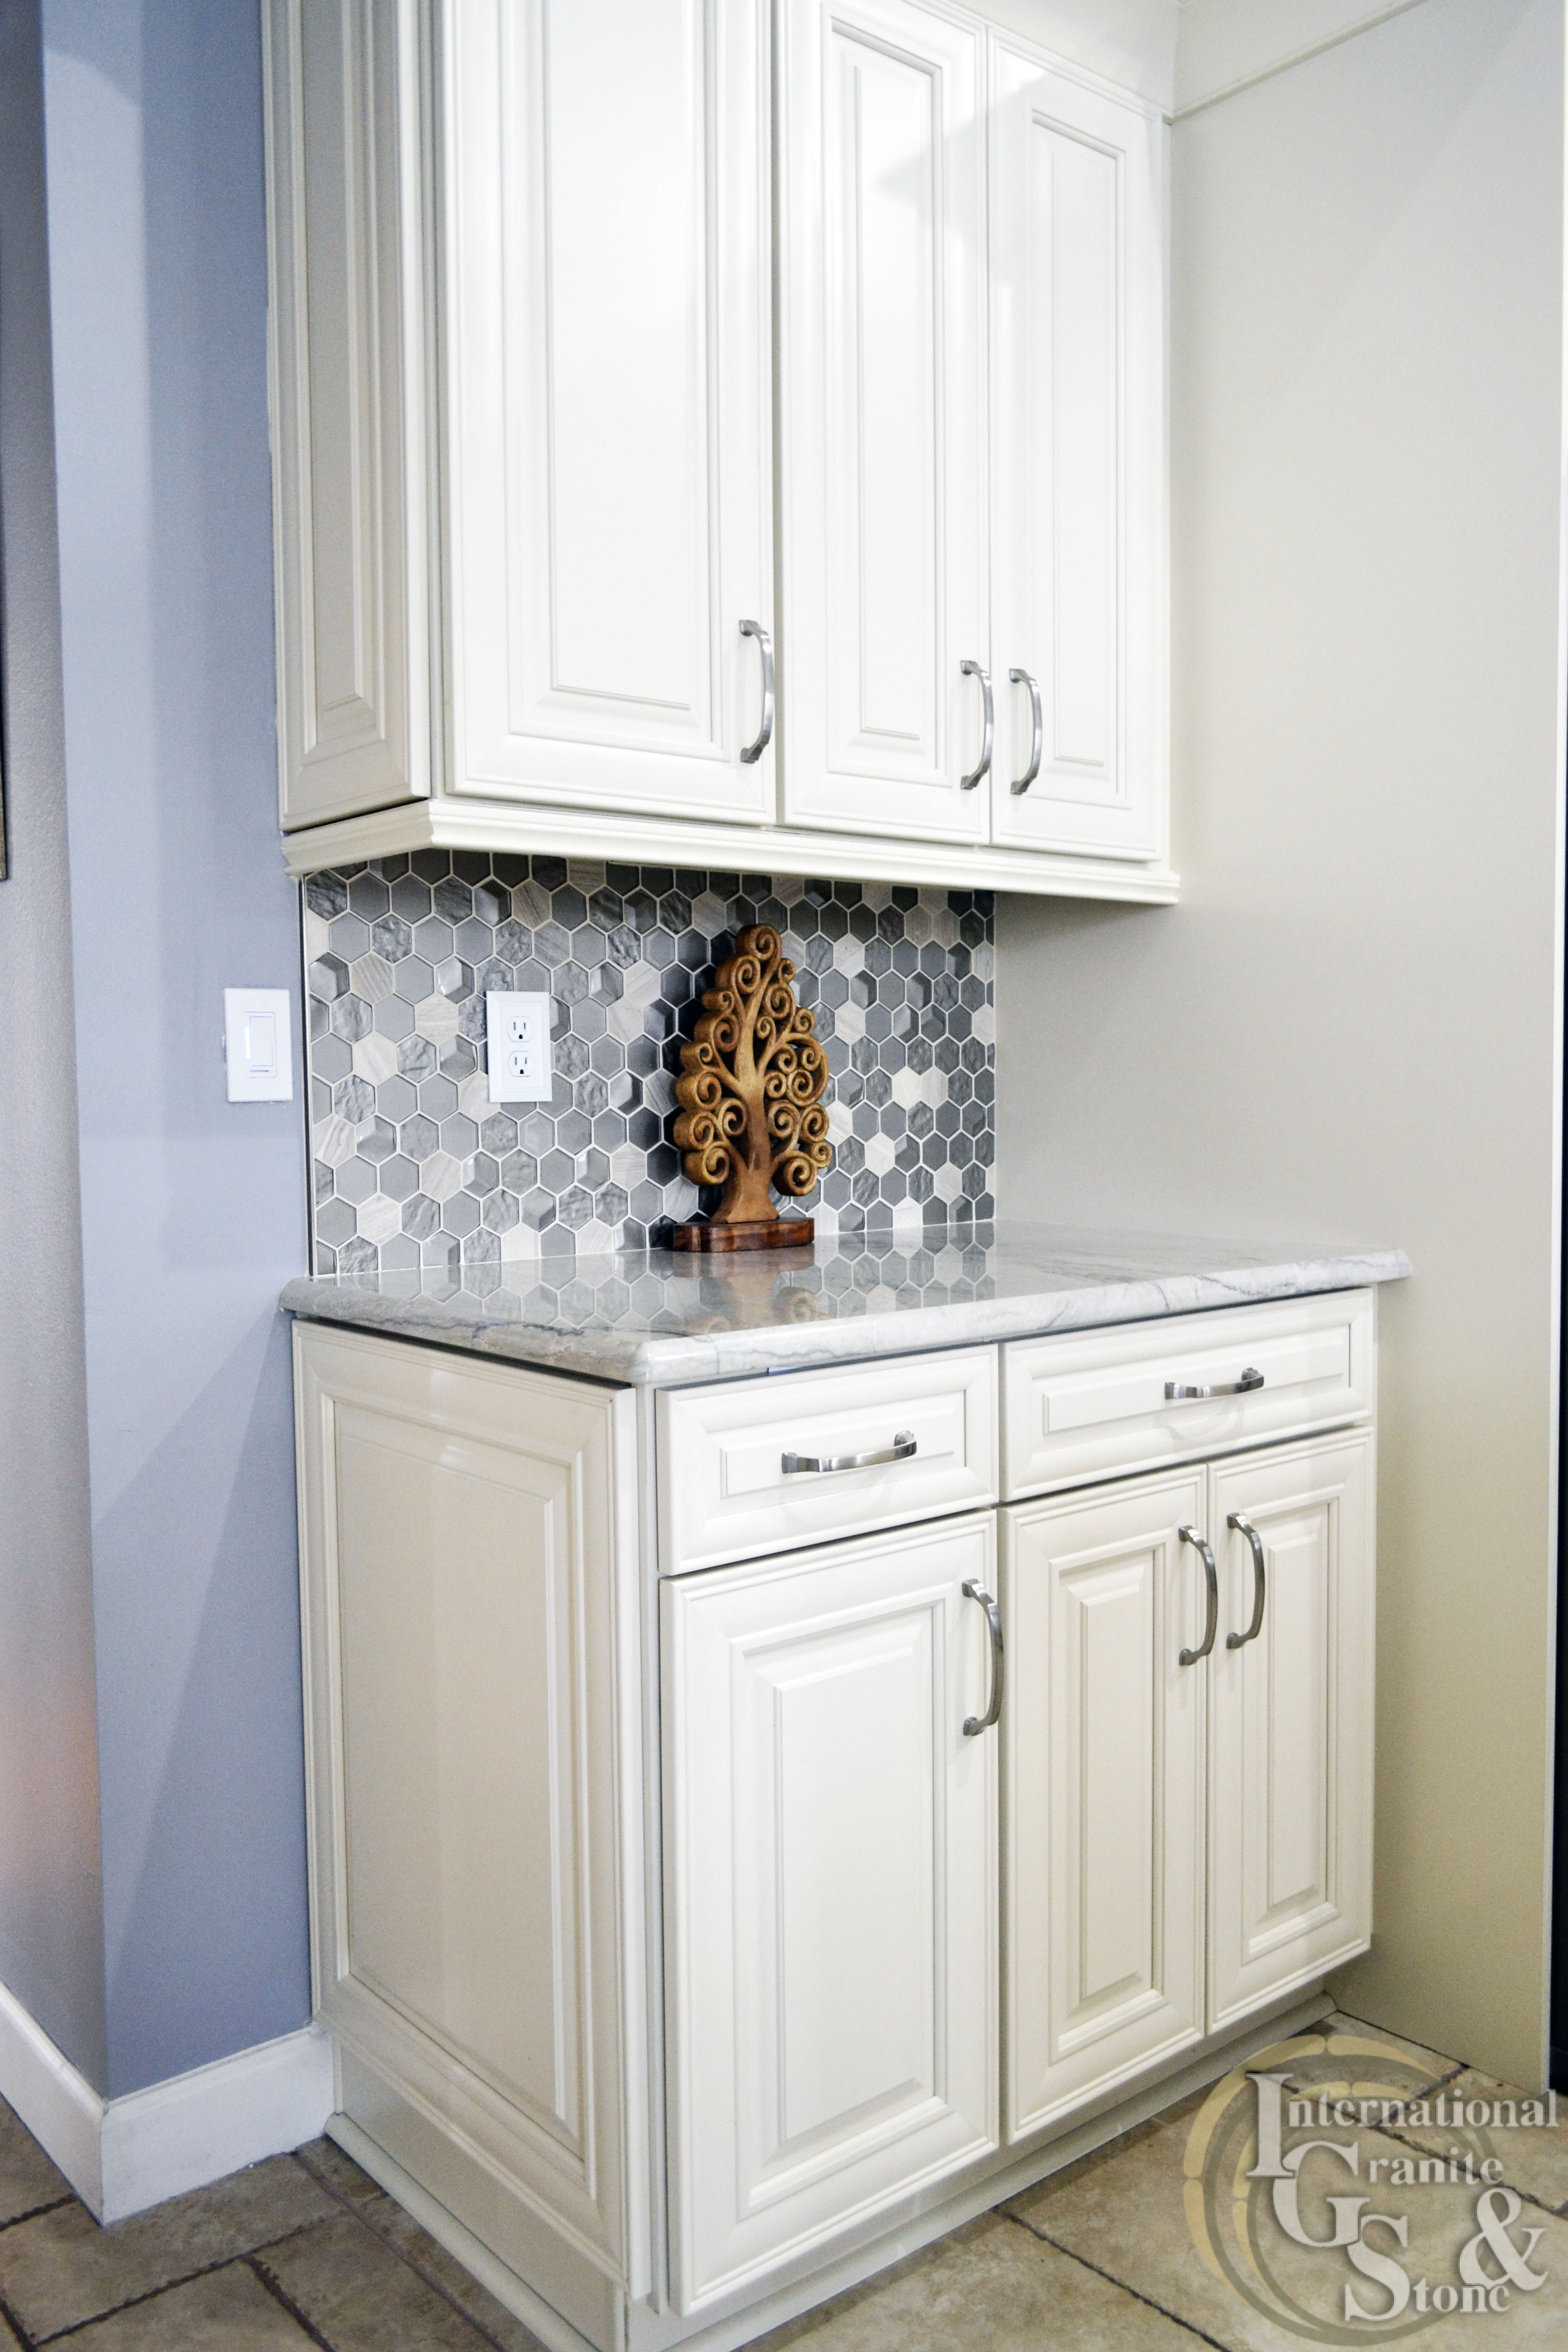 Quartzite Countertops with White Cabinets and Tile Backsplash